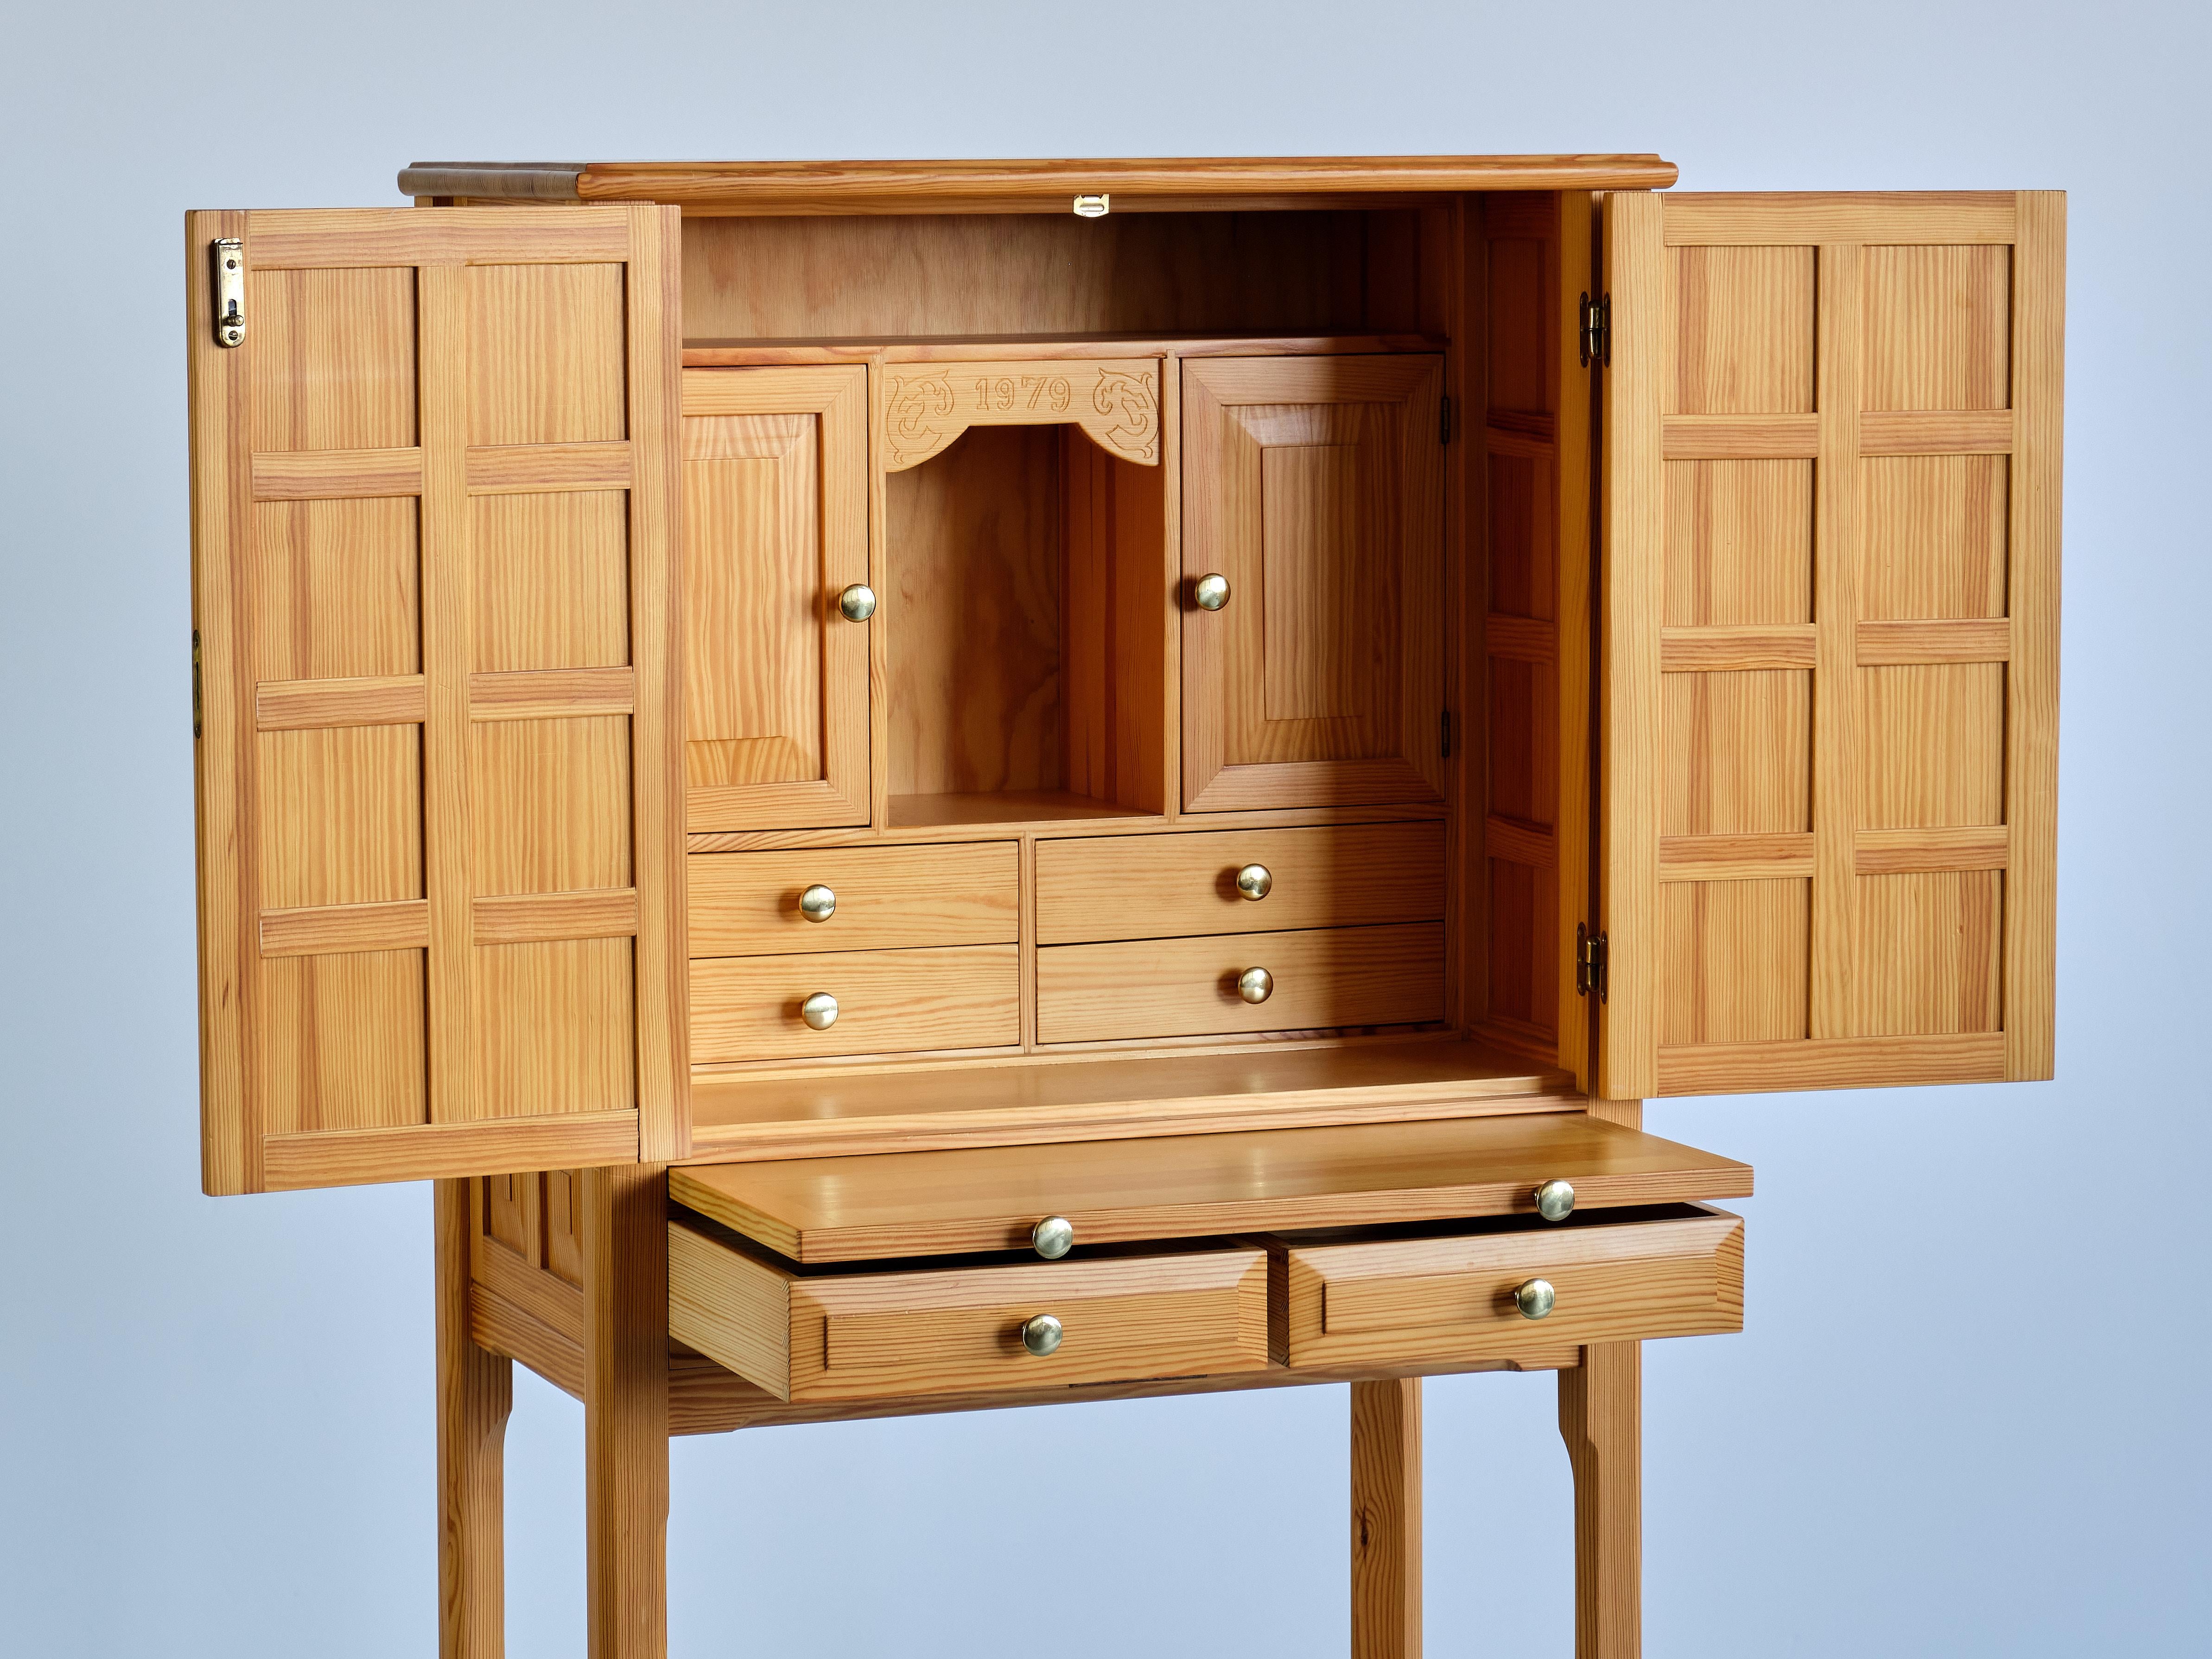 Ulf Ekdahl Cabinet in Solid Pine Wood and Brass, Nybro, Sweden, 1979 For Sale 1